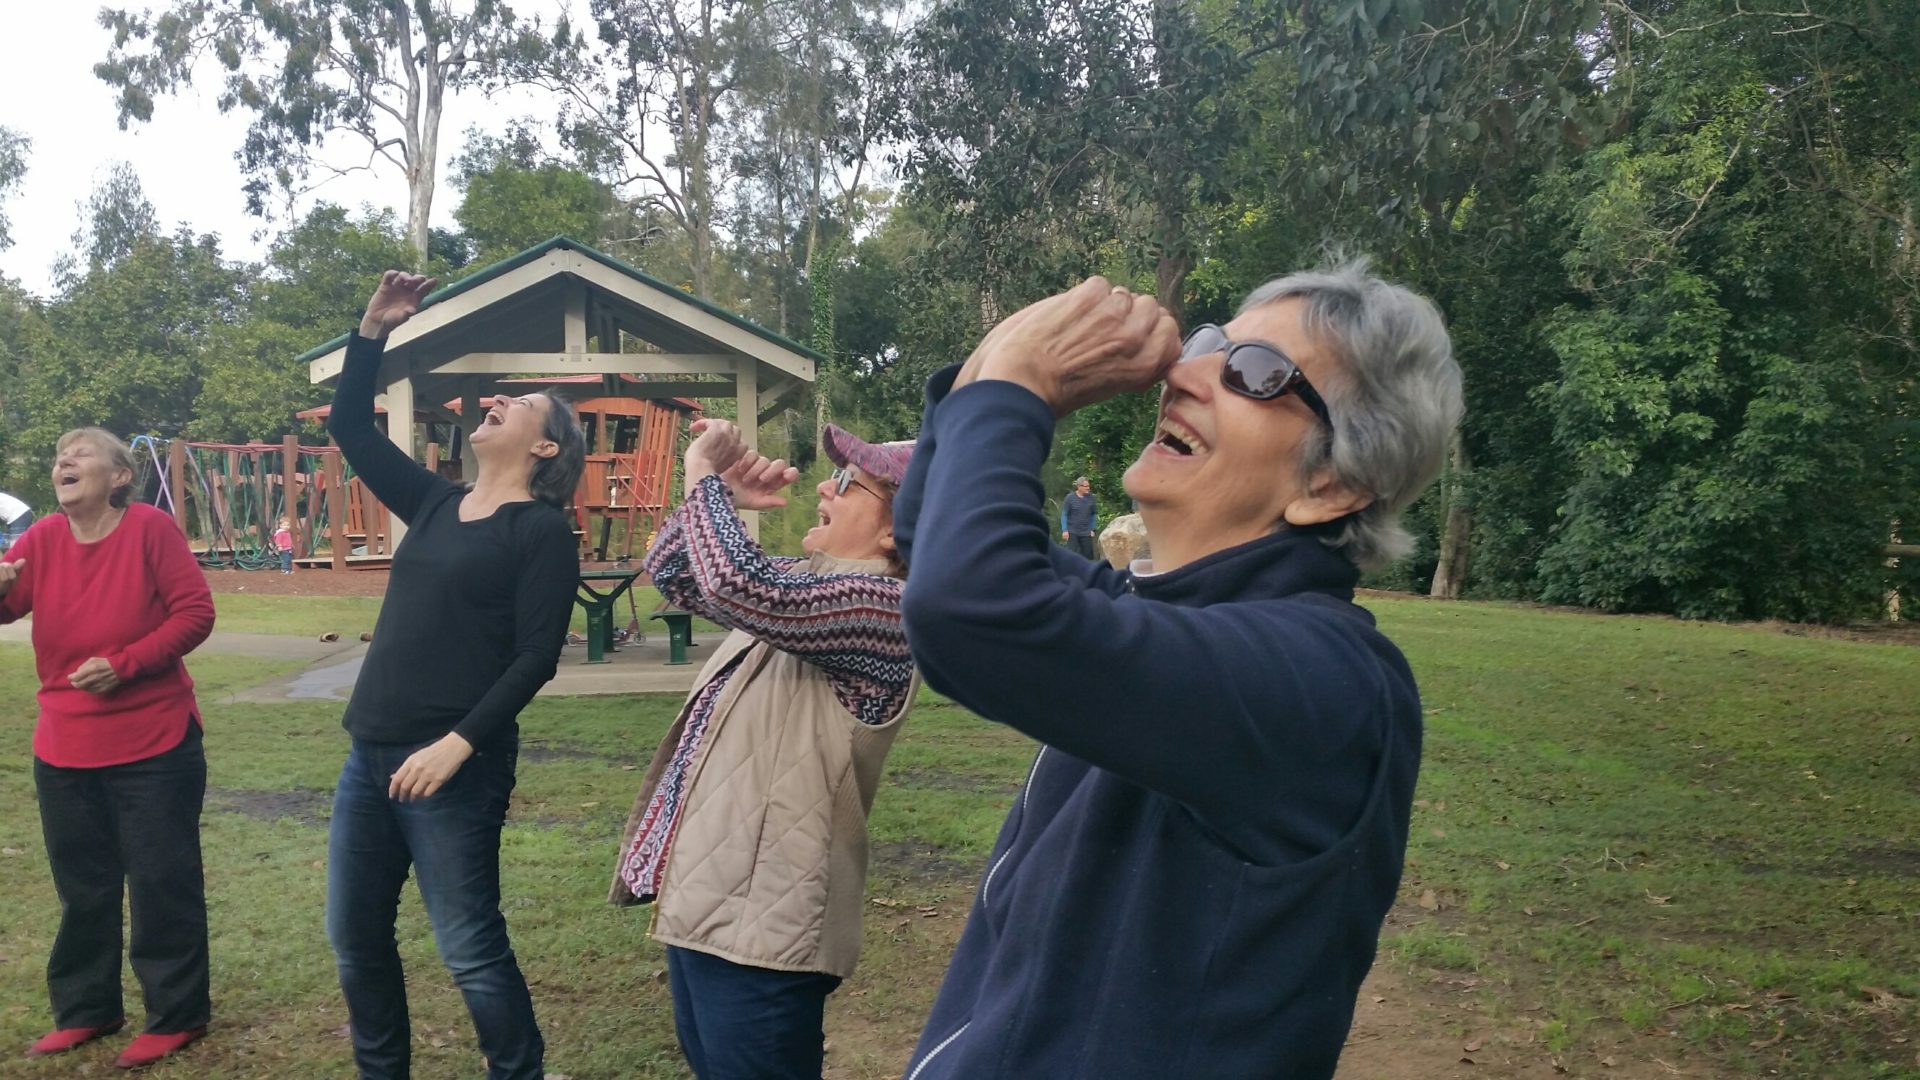 Older people in park laughing as part of laughter yoga session